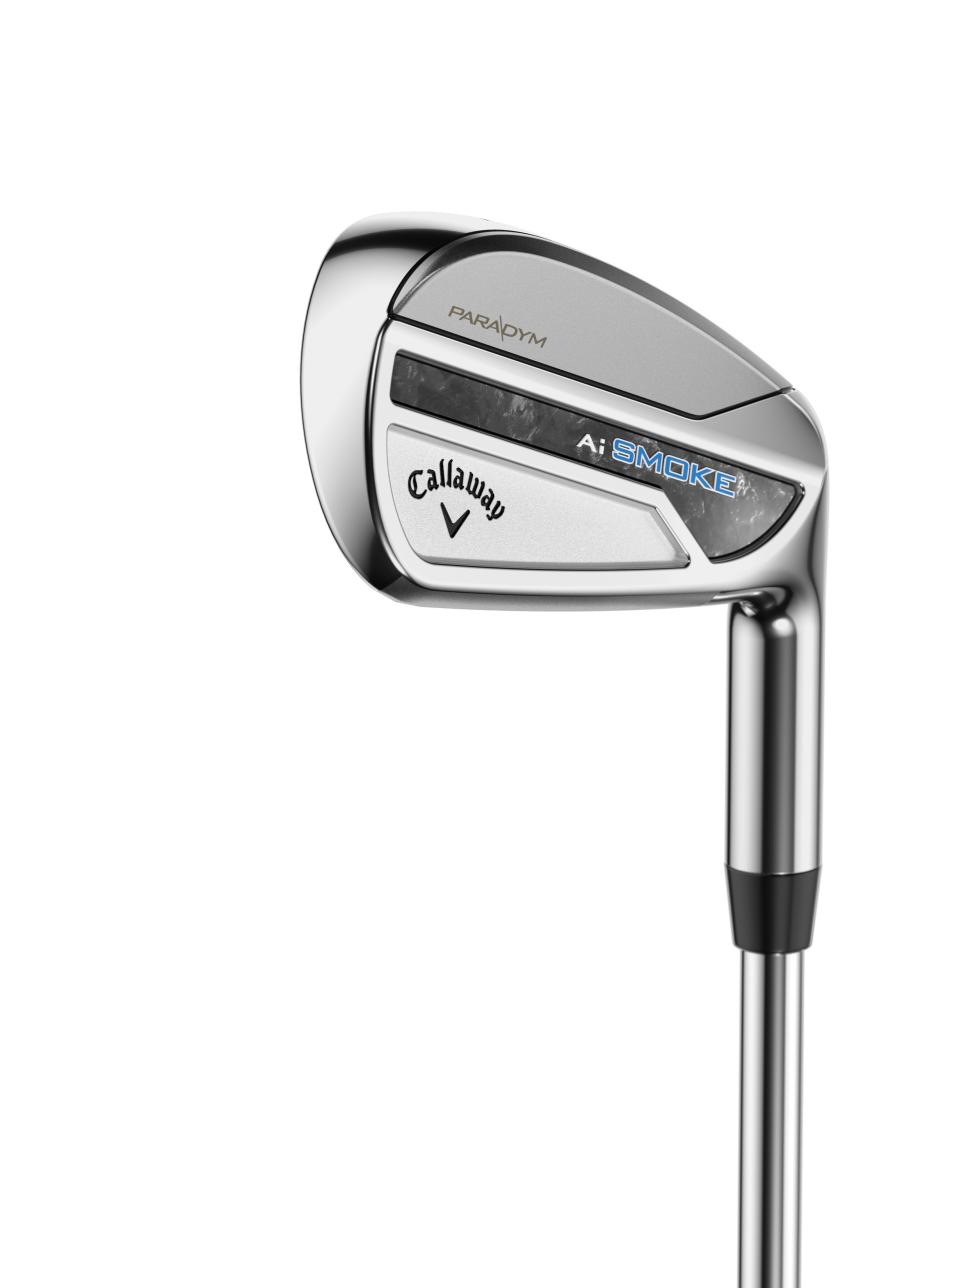 Callaway Paradym Ai Smoke, HL and Max Fast irons: What you need to